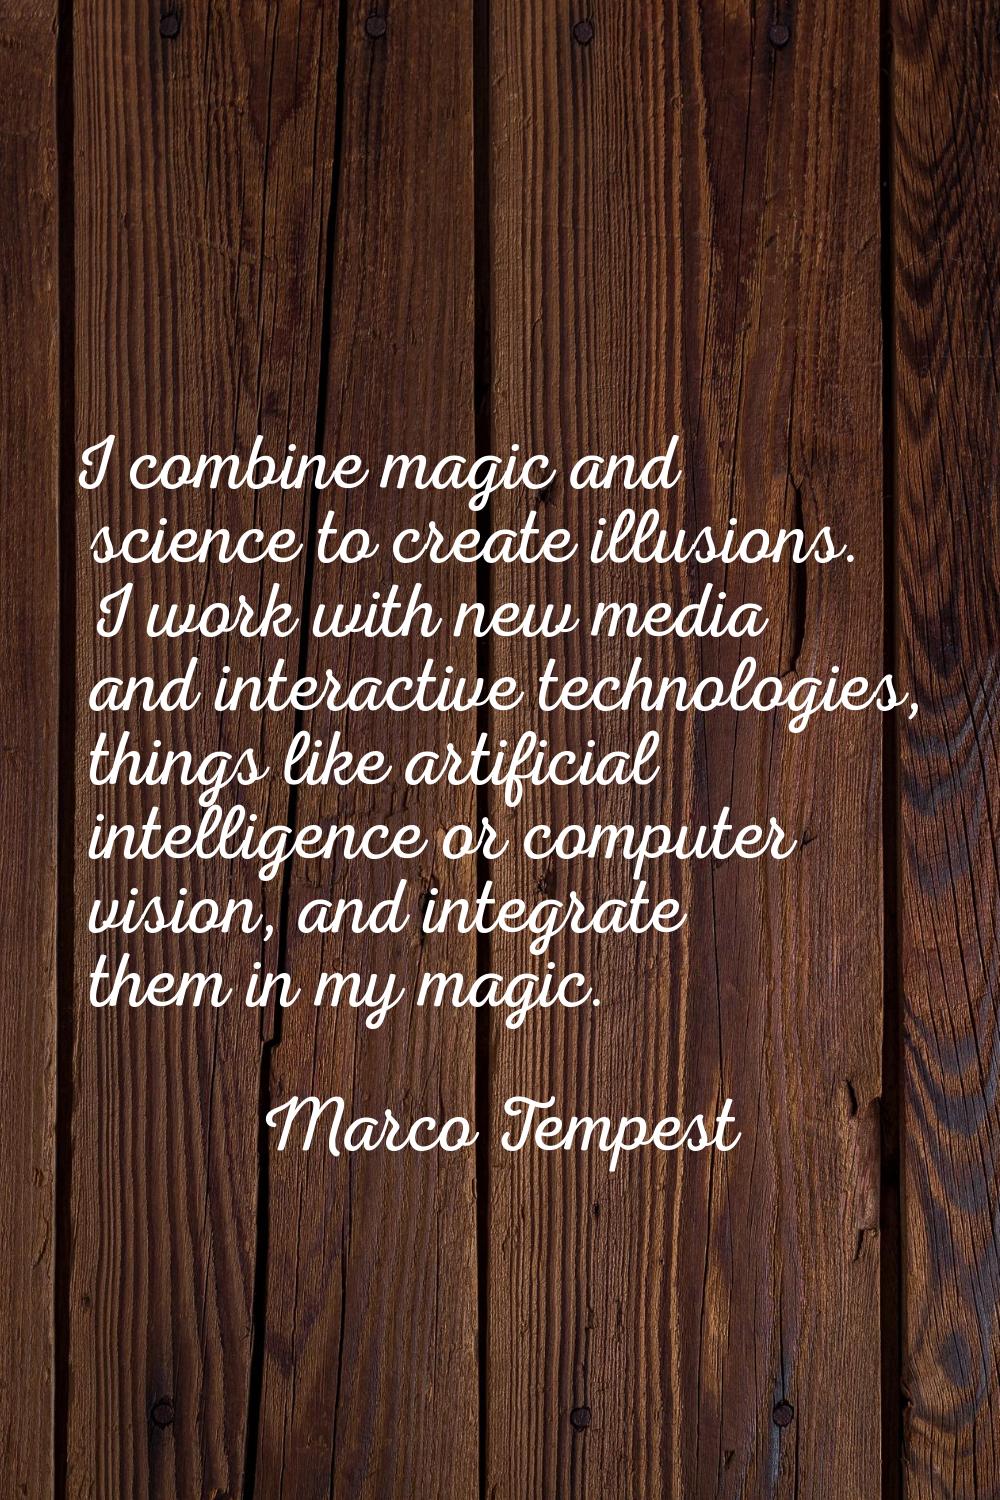 I combine magic and science to create illusions. I work with new media and interactive technologies